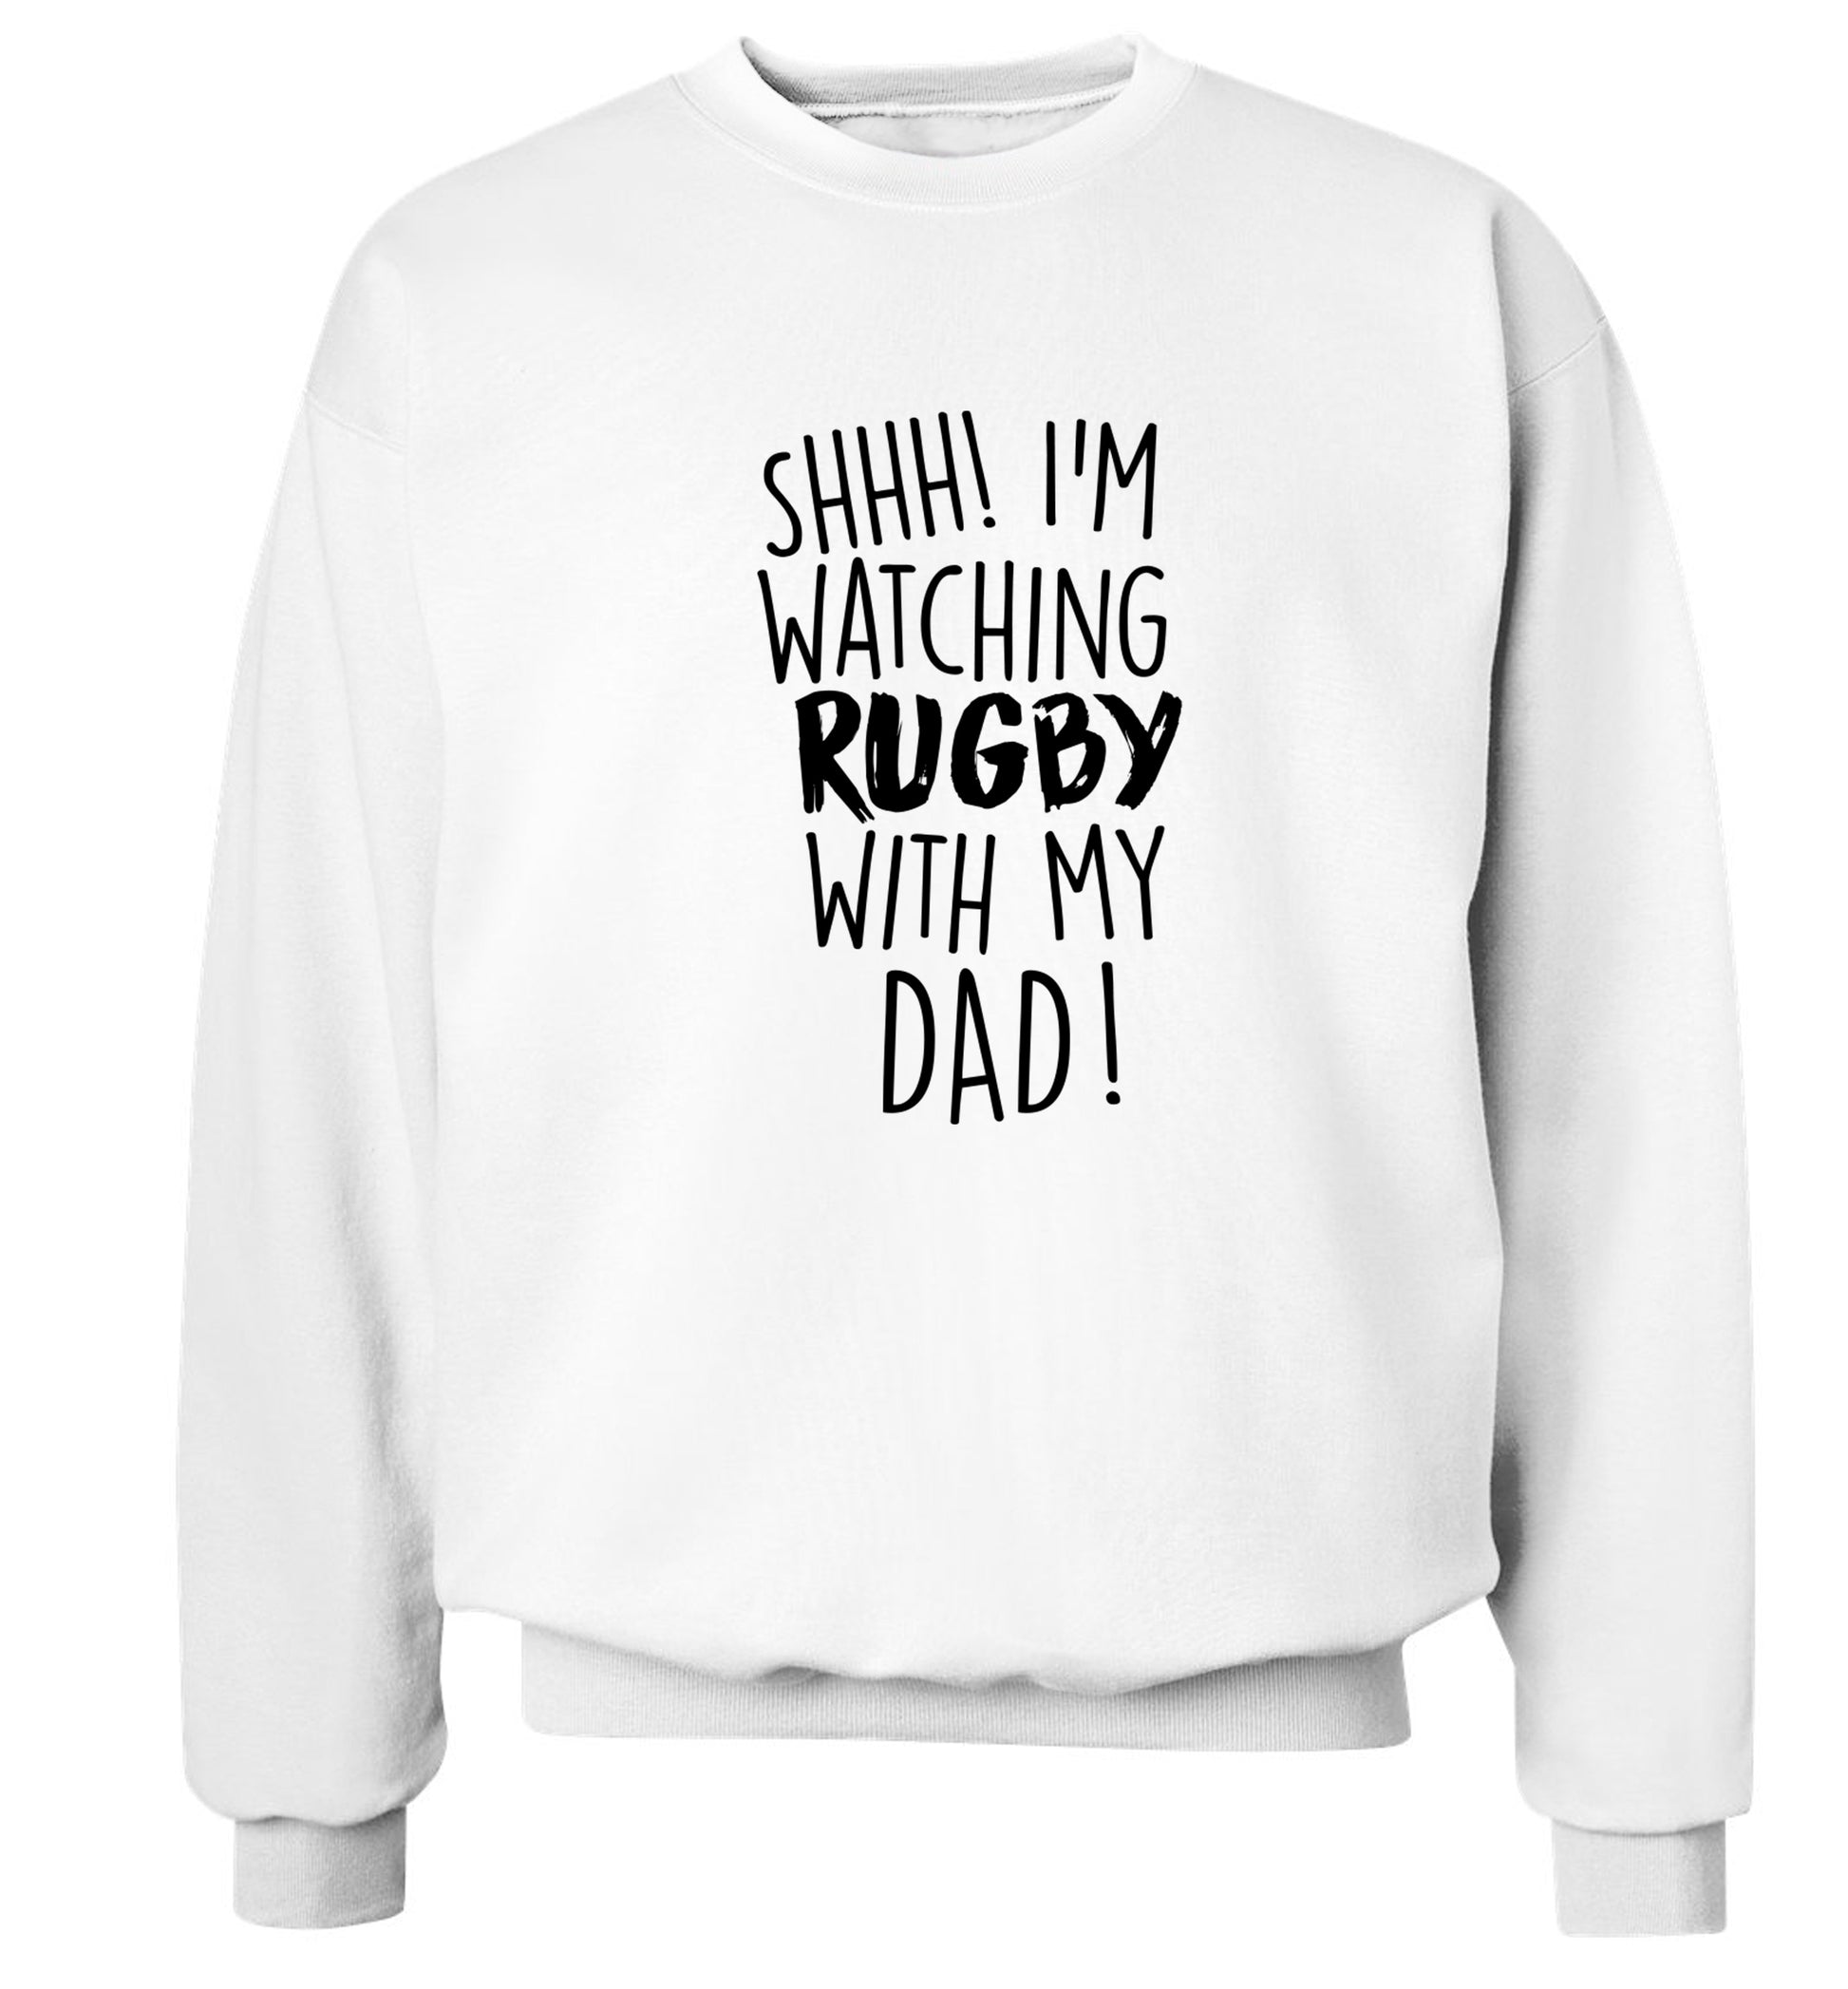 Shh... I'm watching rugby with my dad Adult's unisex white Sweater 2XL